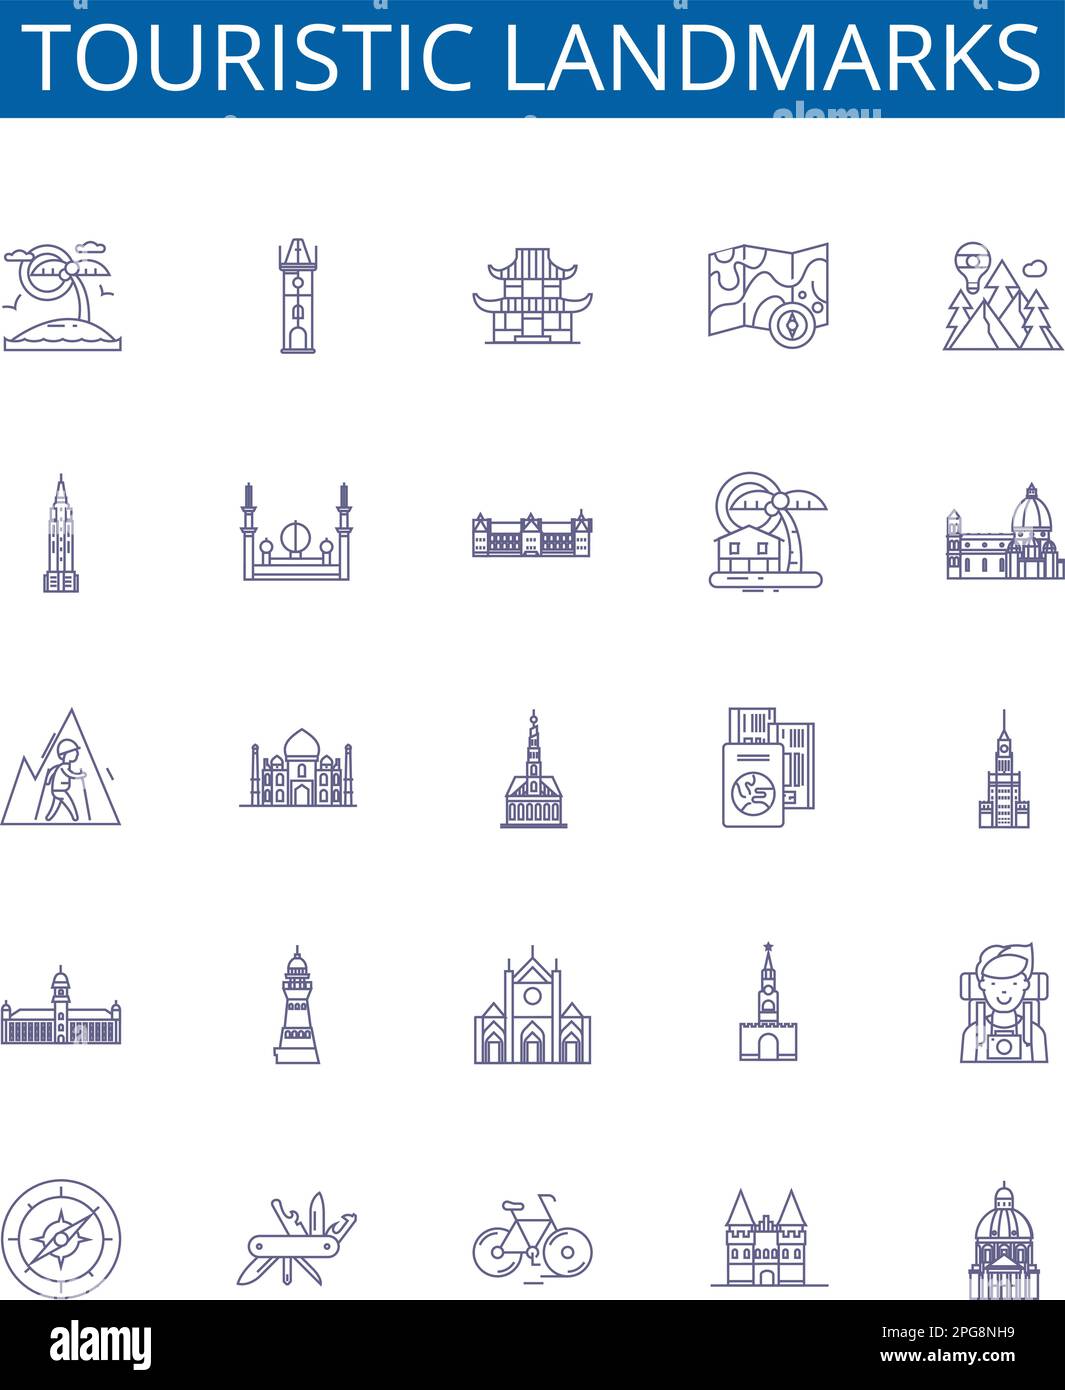 Touristic landmarks line icons signs set. Design collection of Tourist, Landmarks, Monuments, Palaces, Churches, Castles, Ruins, Statues outline Stock Vector